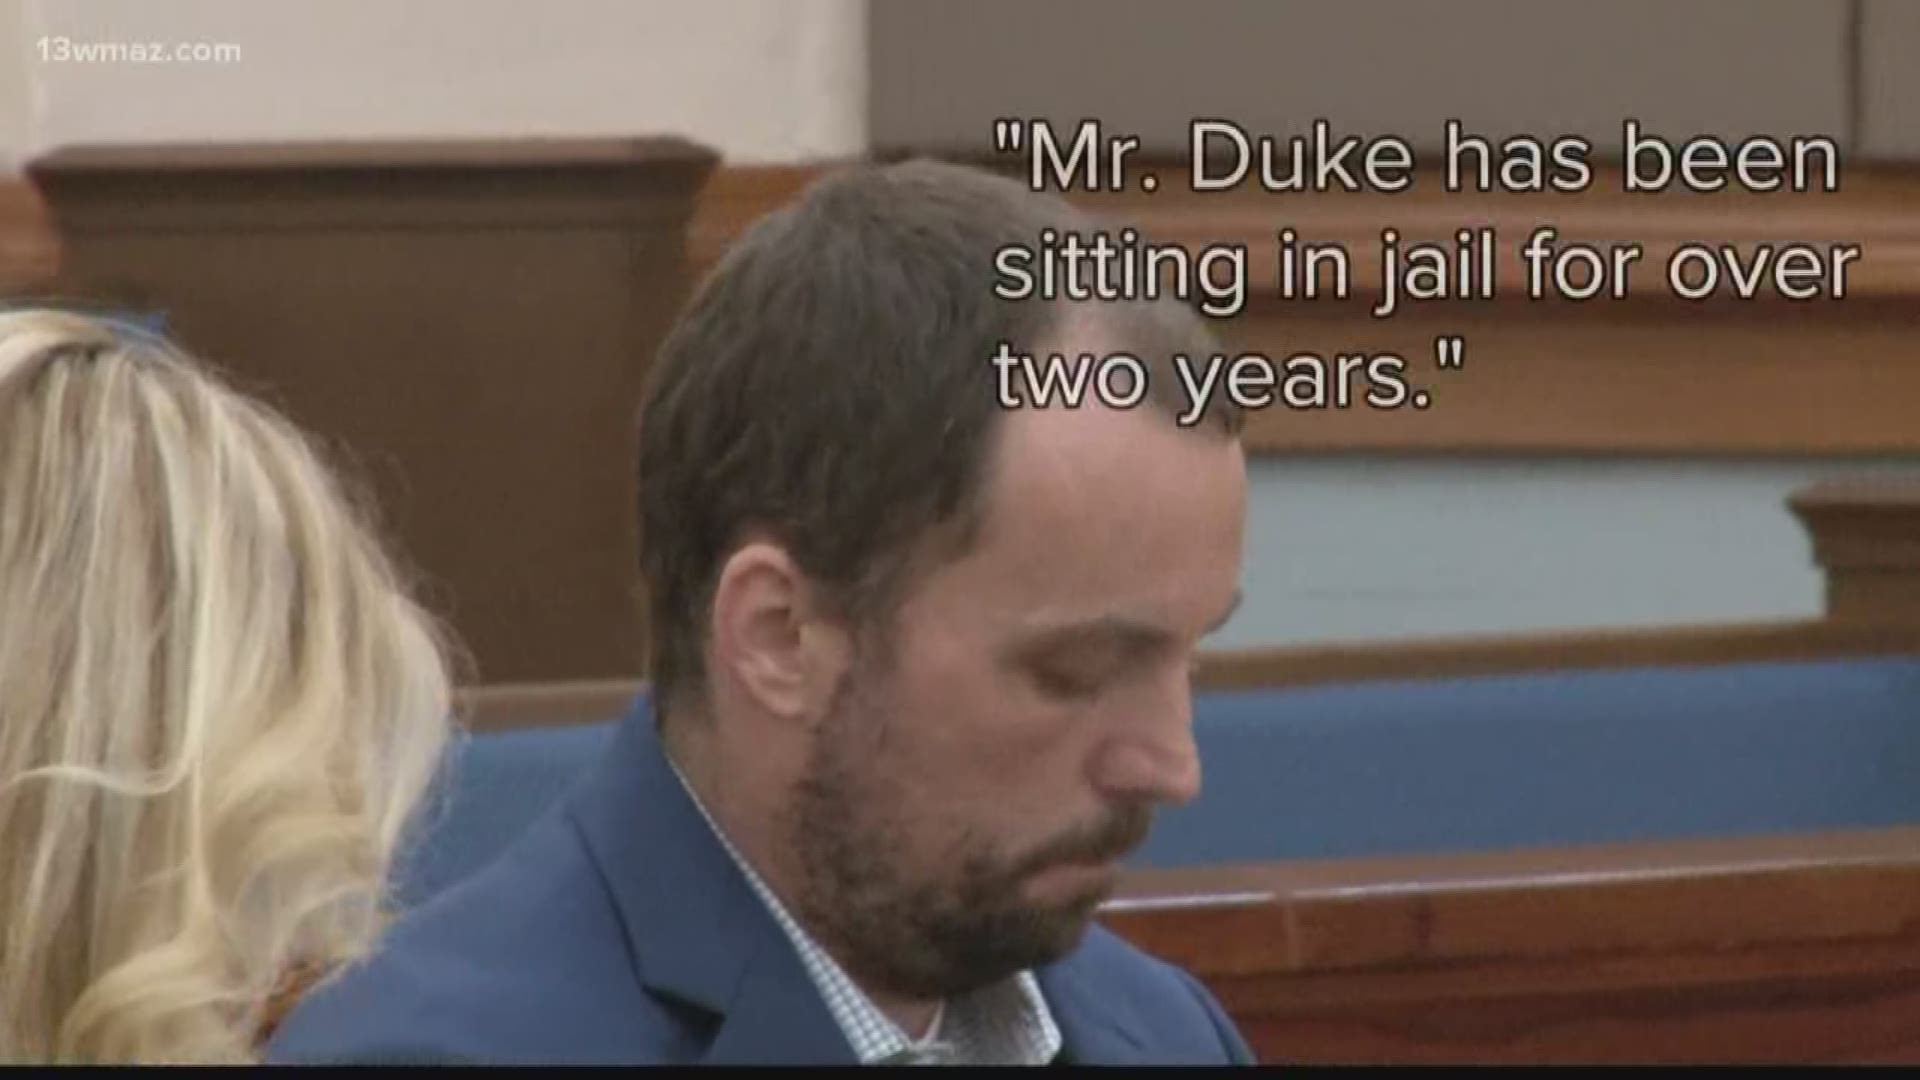 Jury selection was supposed to start Monday morning, but now, the state Supreme Court says they must hear arguments over appeals filed by Ryan Duke's attorneys before the case can proceed.